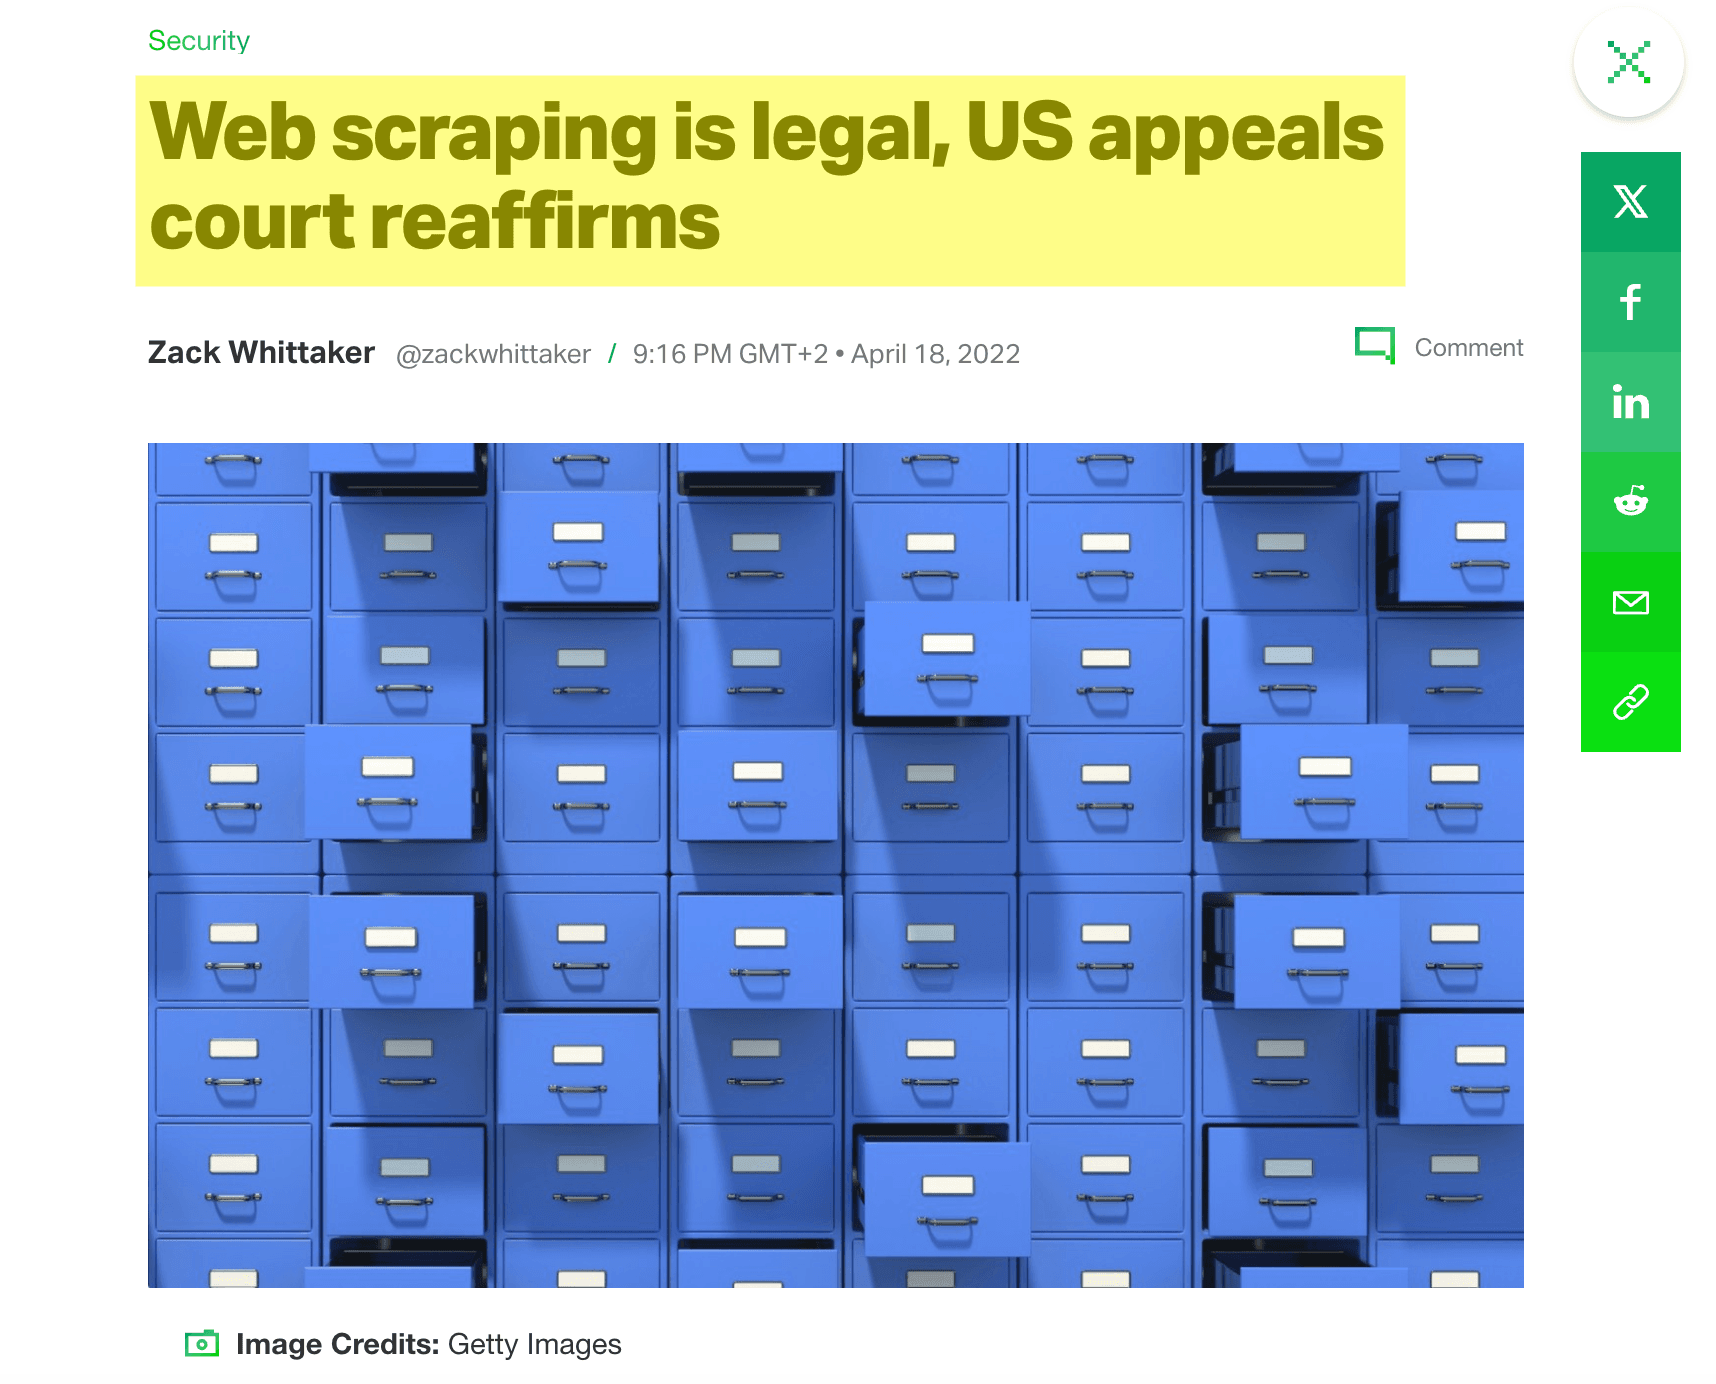 techcrunch article webscraping is legal in the us - image20.png